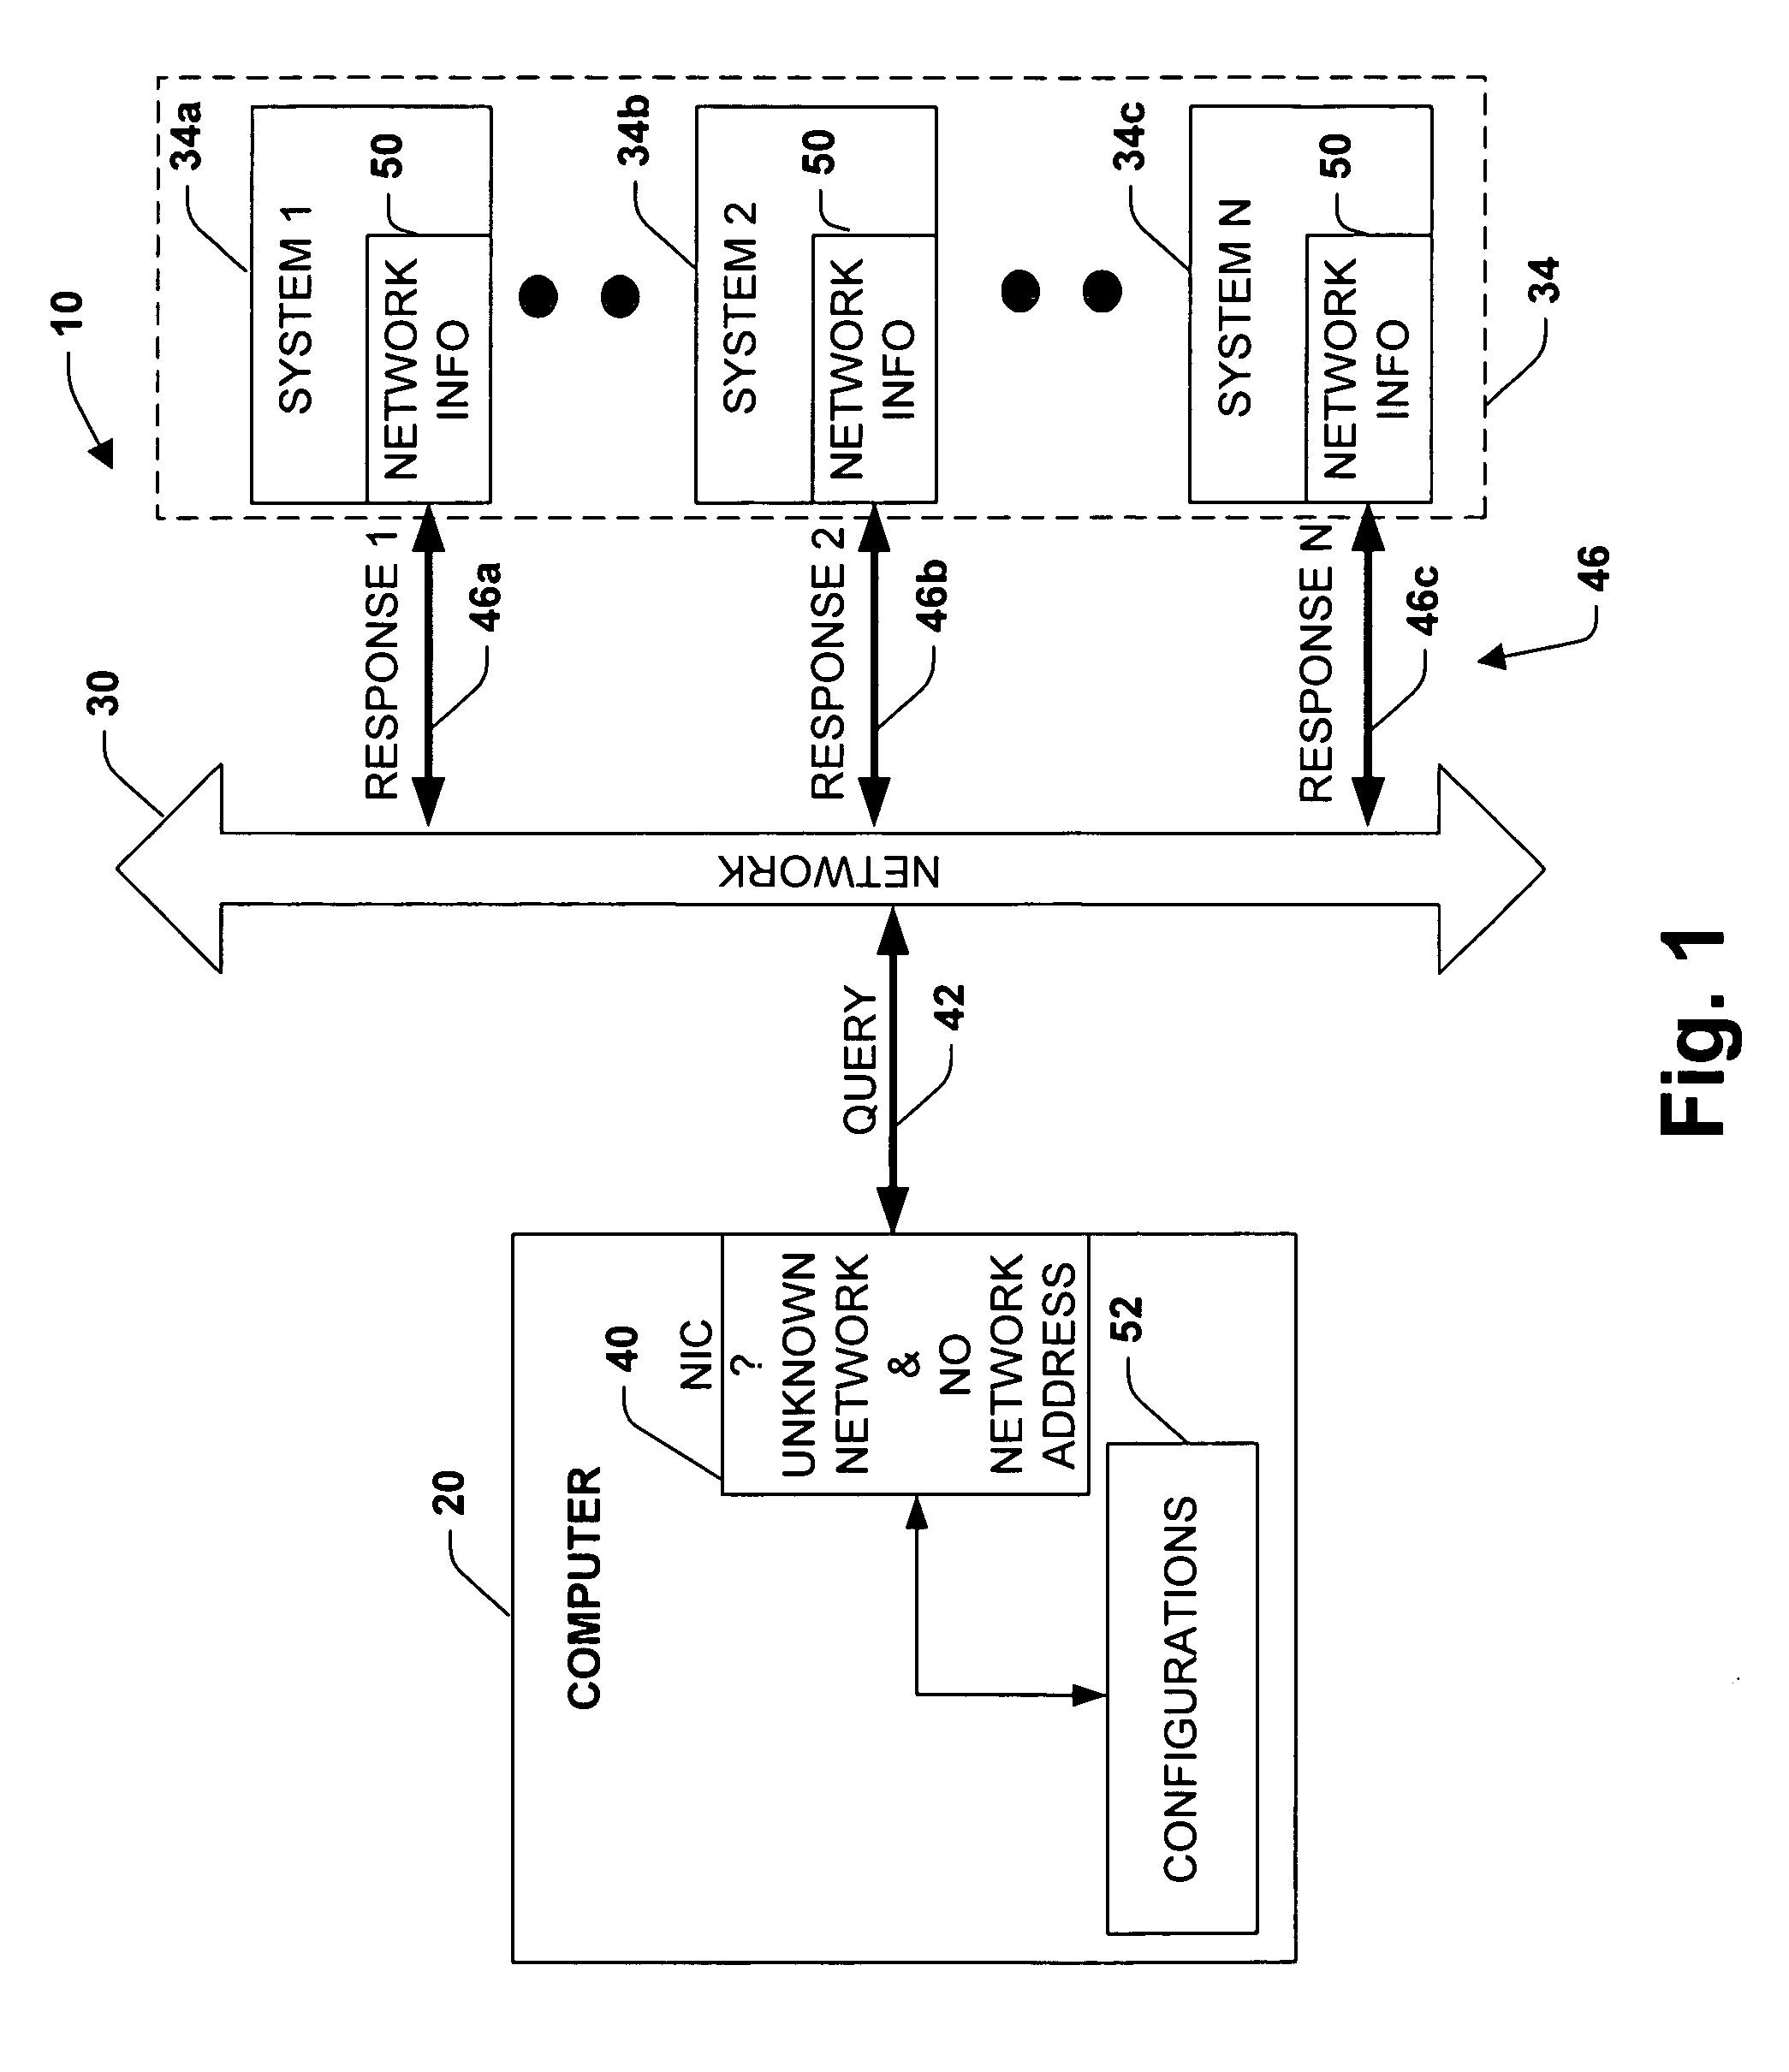 System and method for automatic detection and configuration of network parameters